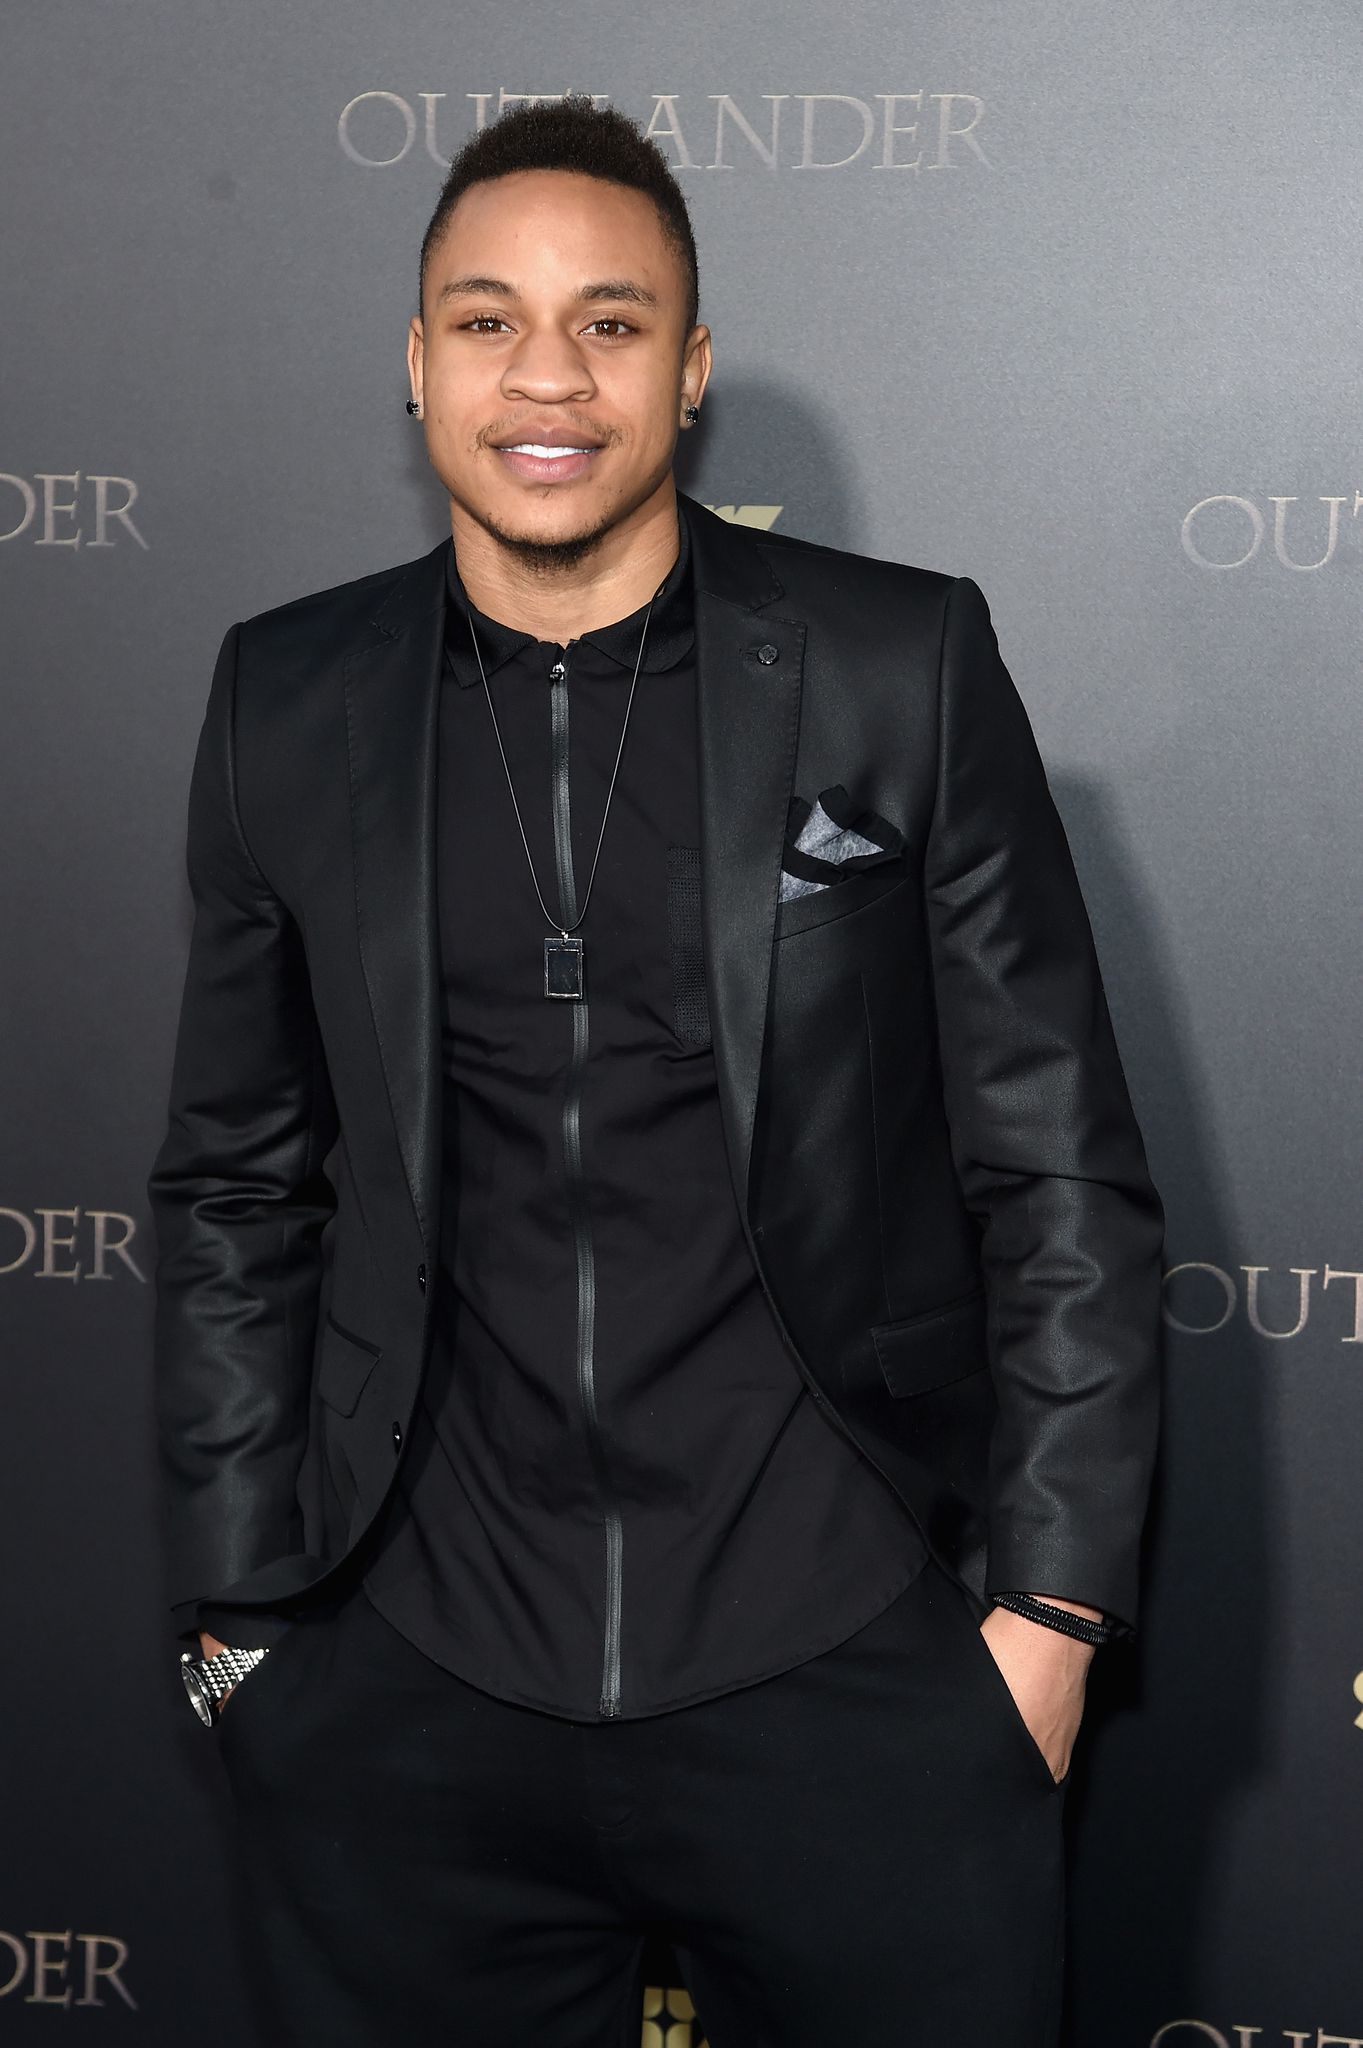 Rotimi at event of Outlander (2014)